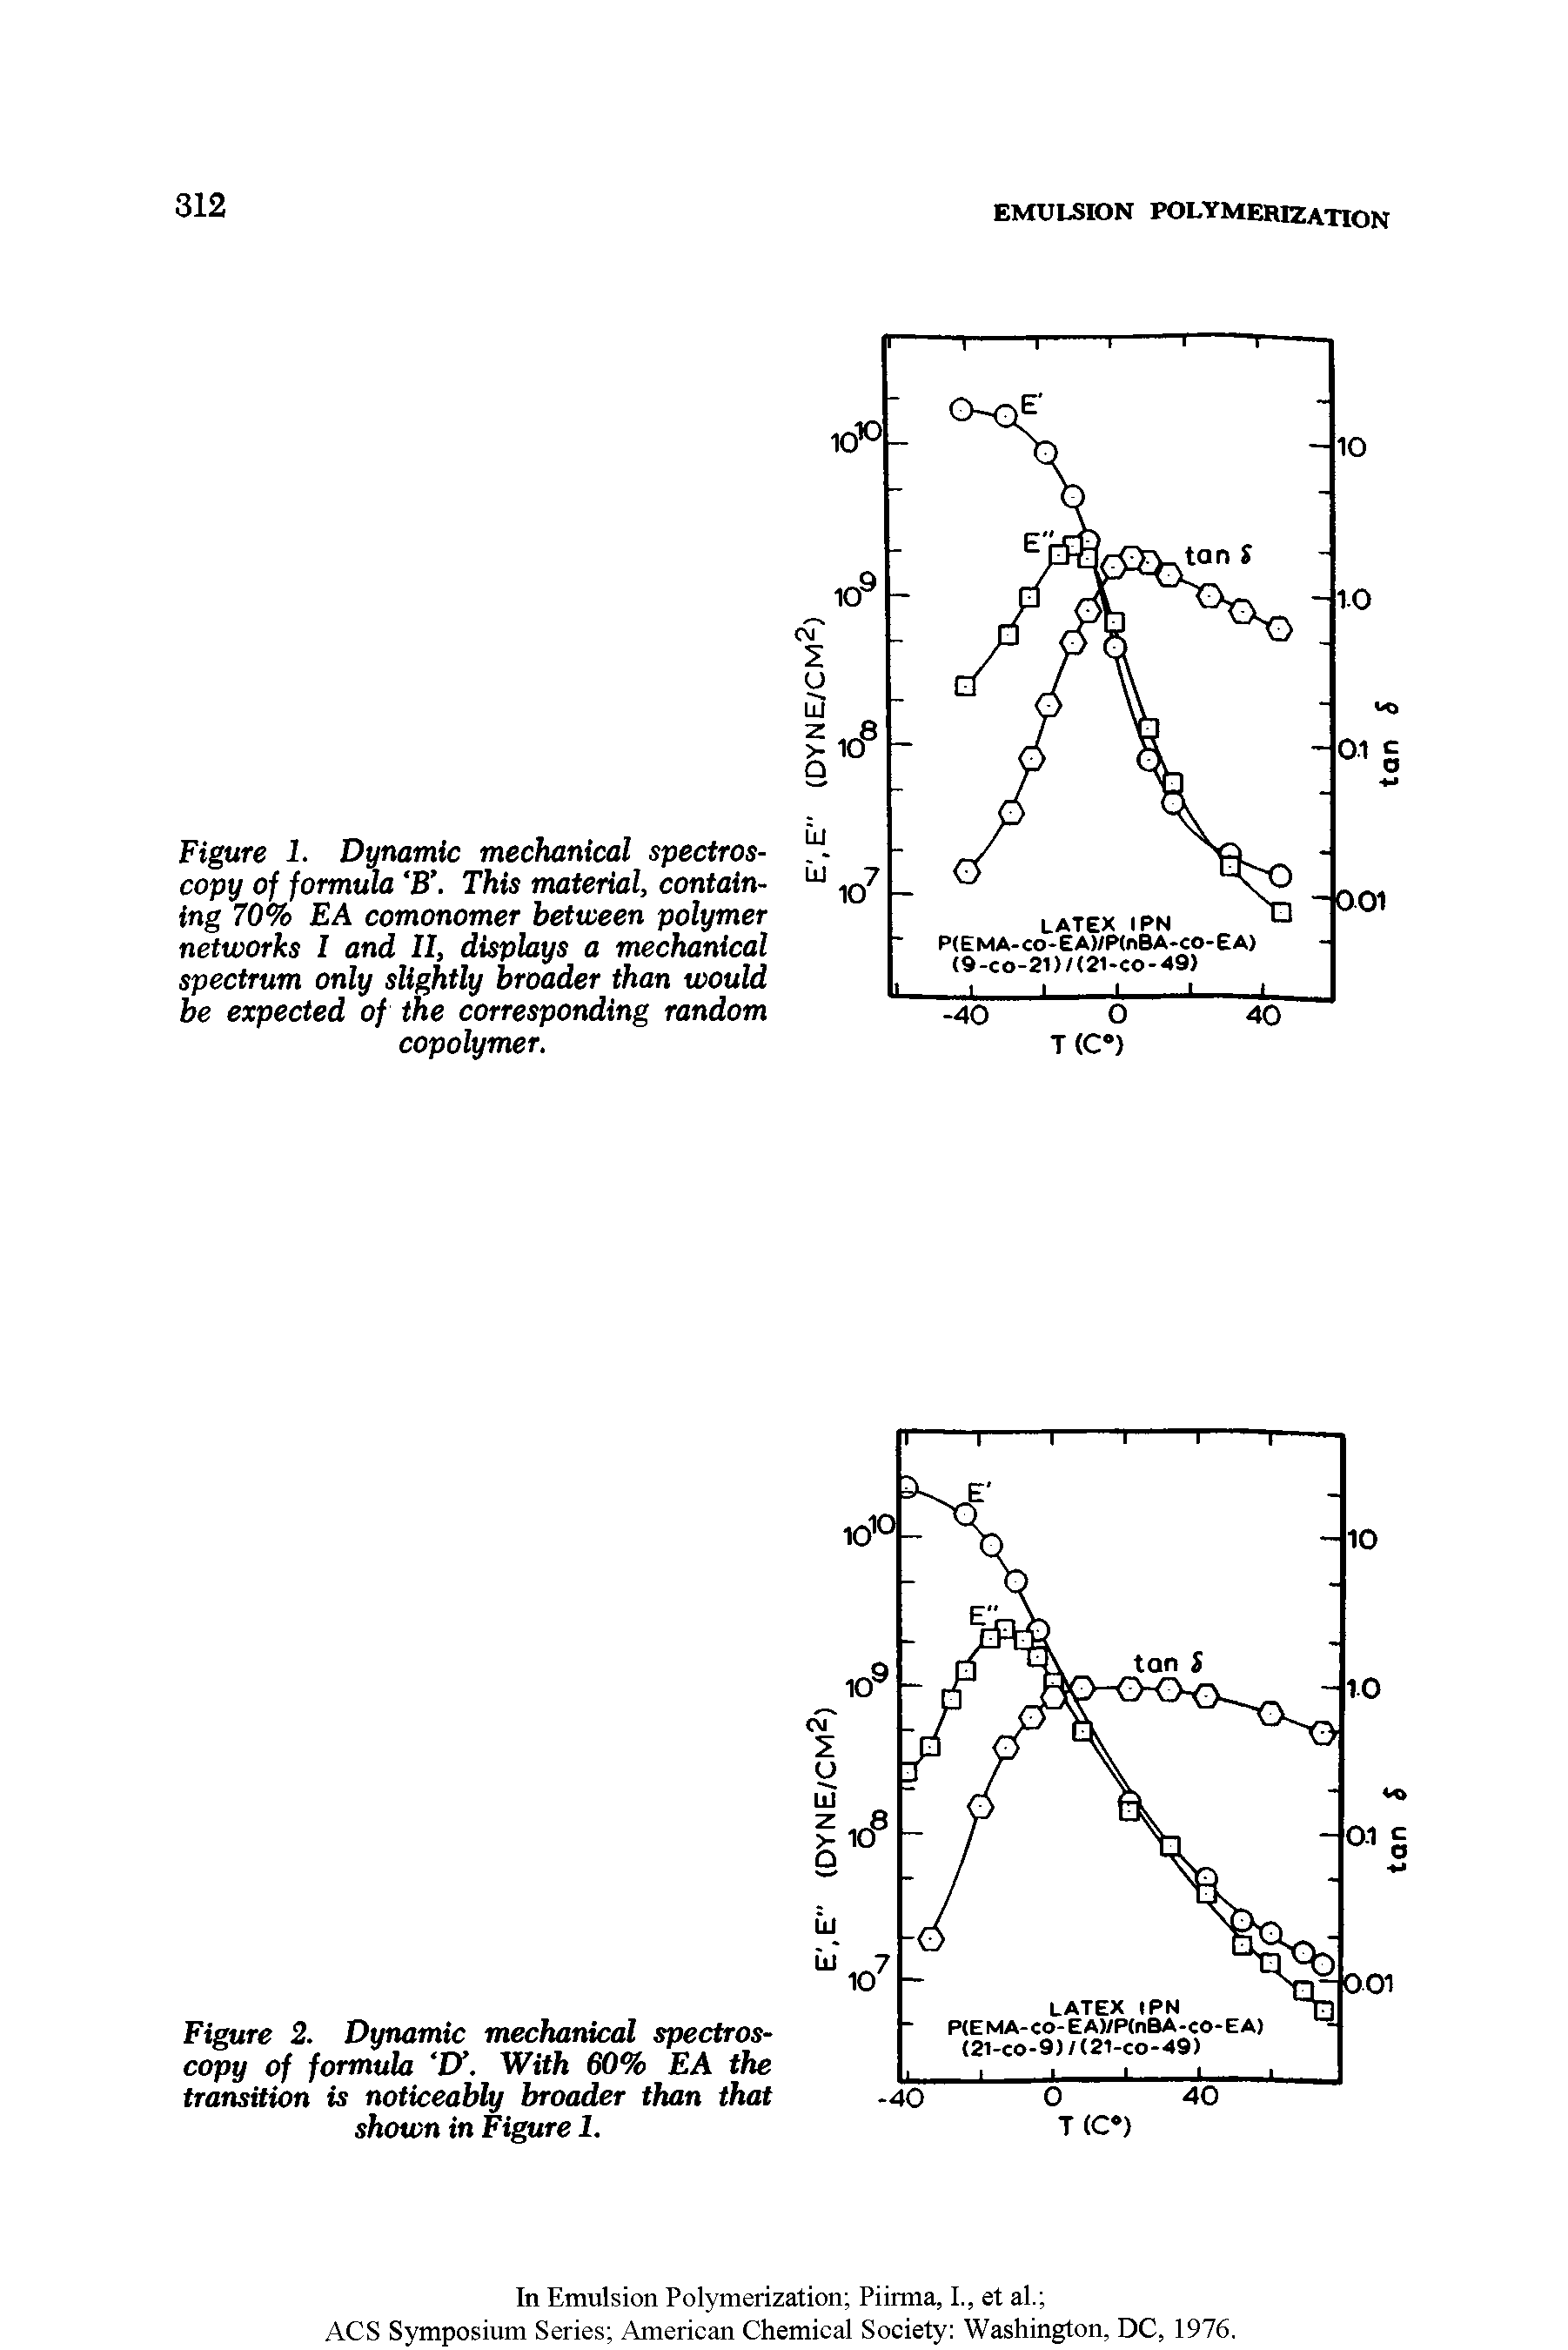 Figure 2. Dynamic mechanical spectroscopy of formula U. With 60% EA the transition is noticeably broader than that shown in Figure 1.